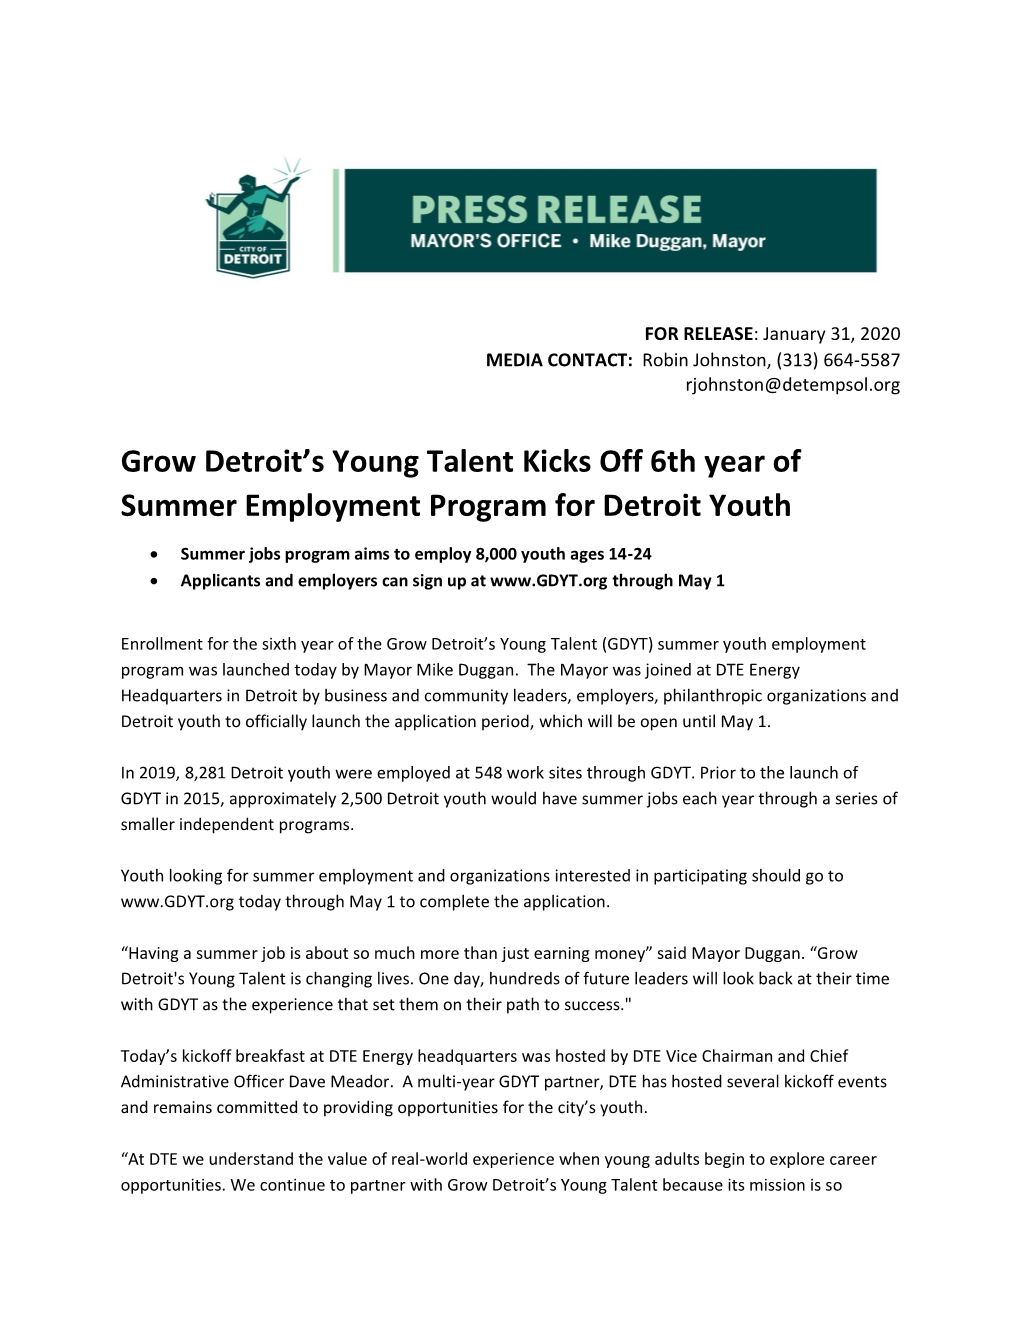 Grow Detroit's Young Talent Kicks Off 6Th Year of Summer Employment